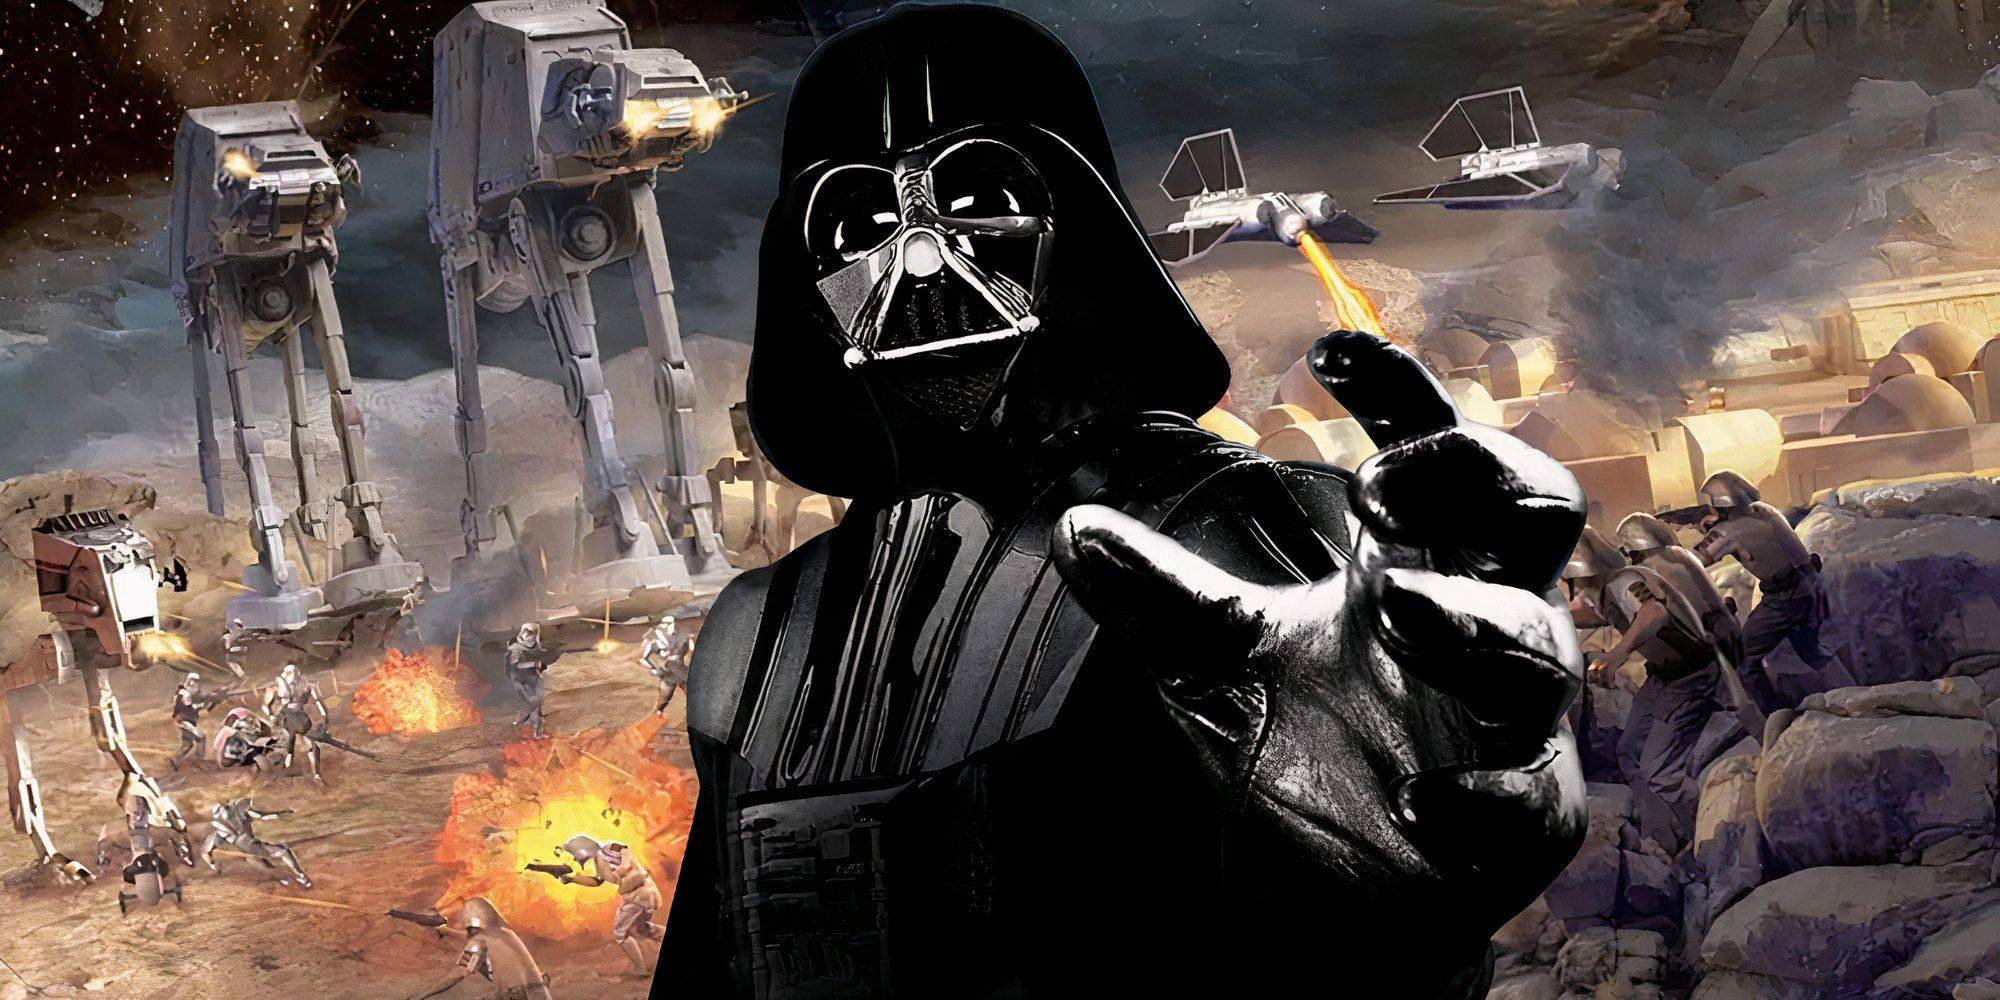 Darth Vader force choking with an epic battle from Star Wars: Empire at War behind him